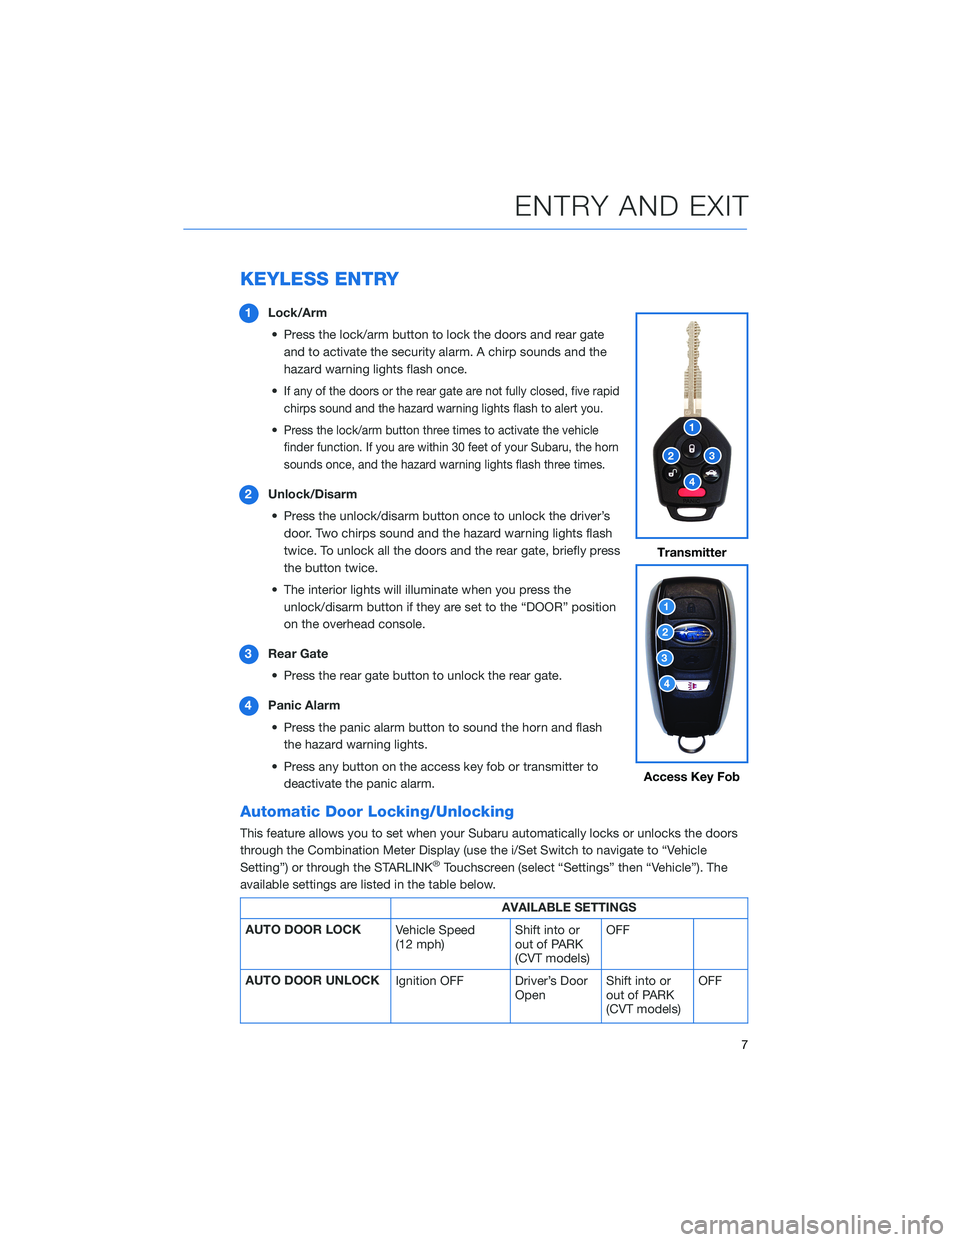 SUBARU CROSSTREK 2022  Getting Started Guide KEYLESS ENTRY
1Lock/Arm
• Press the lock/arm button to lock the doors and rear gate
and to activate the security alarm. A chirp sounds and the
hazard warning lights flash once.
•
If any of the doo